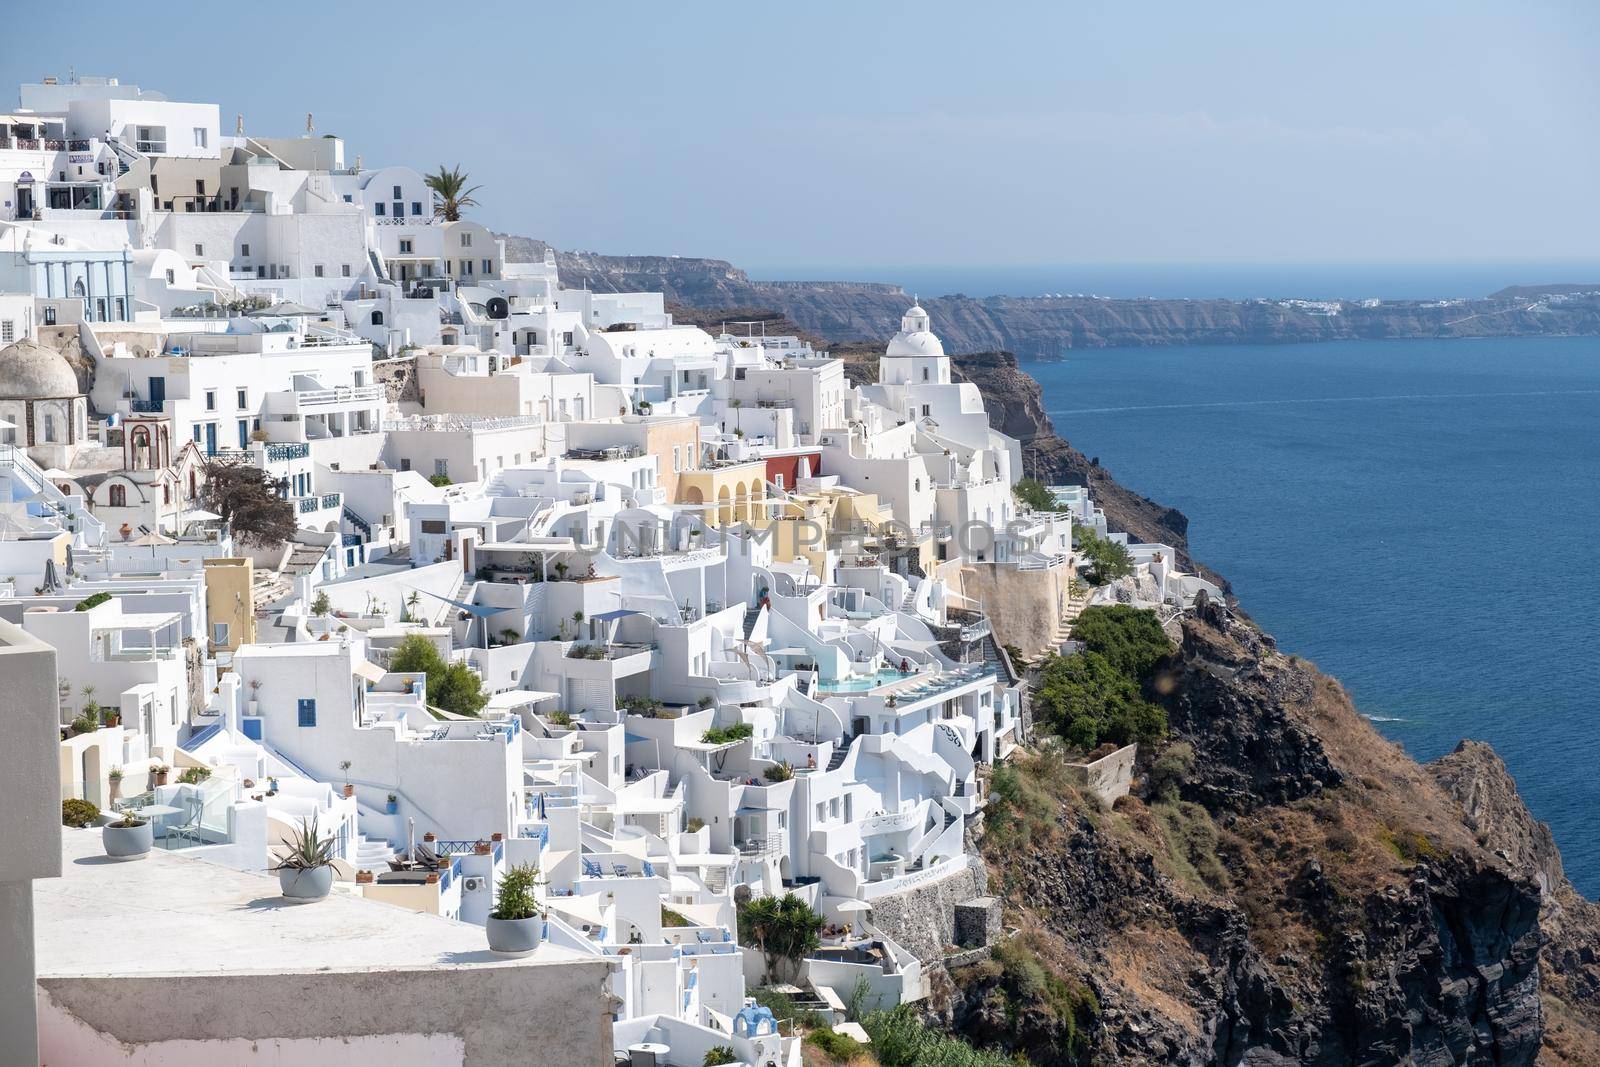 White church at Fira Santorini, Panoramic view of mountains, sea and nature from Fira town, Santorini island Greece. View of the caldera and ships in the bay of Santorini